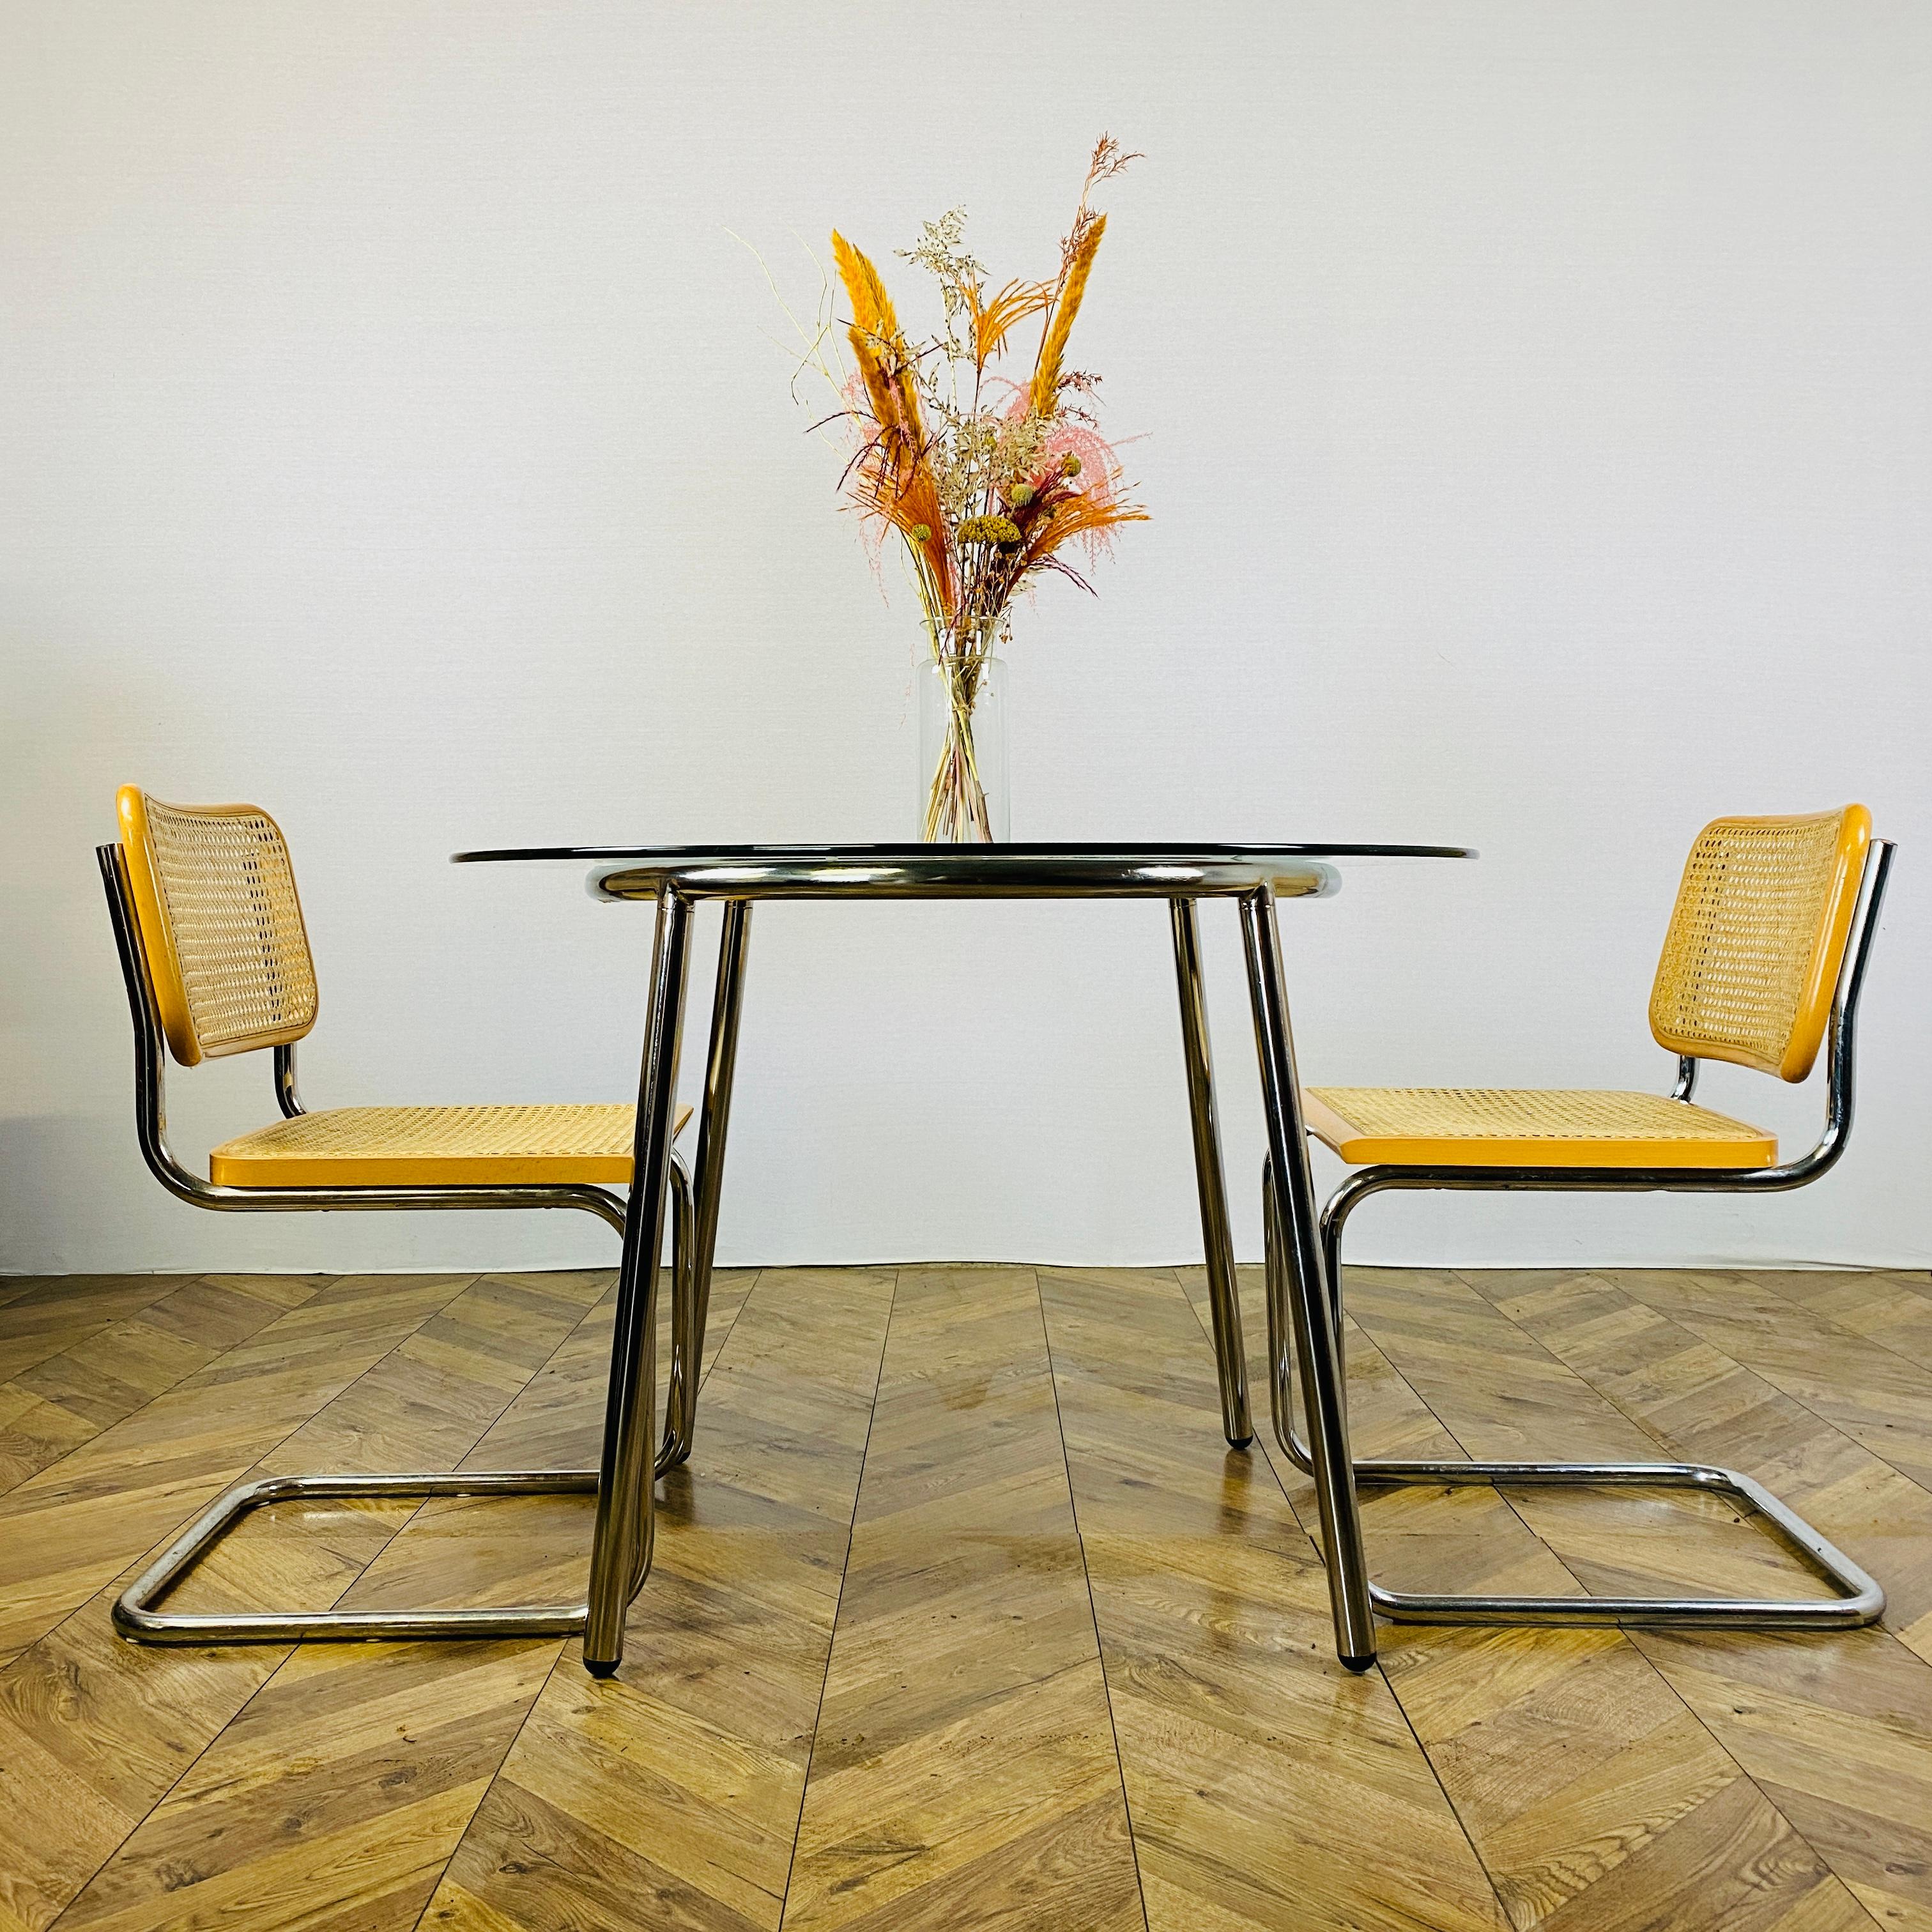 A Vintage, Modernist glass and chrome dining table + set of 2 Marcel Breuer B32 ‘Cesca’ chairs.

The tubular chrome frame and the glass top are in great vintage condition, with no chips and only minor wear, in-keeping with its age and